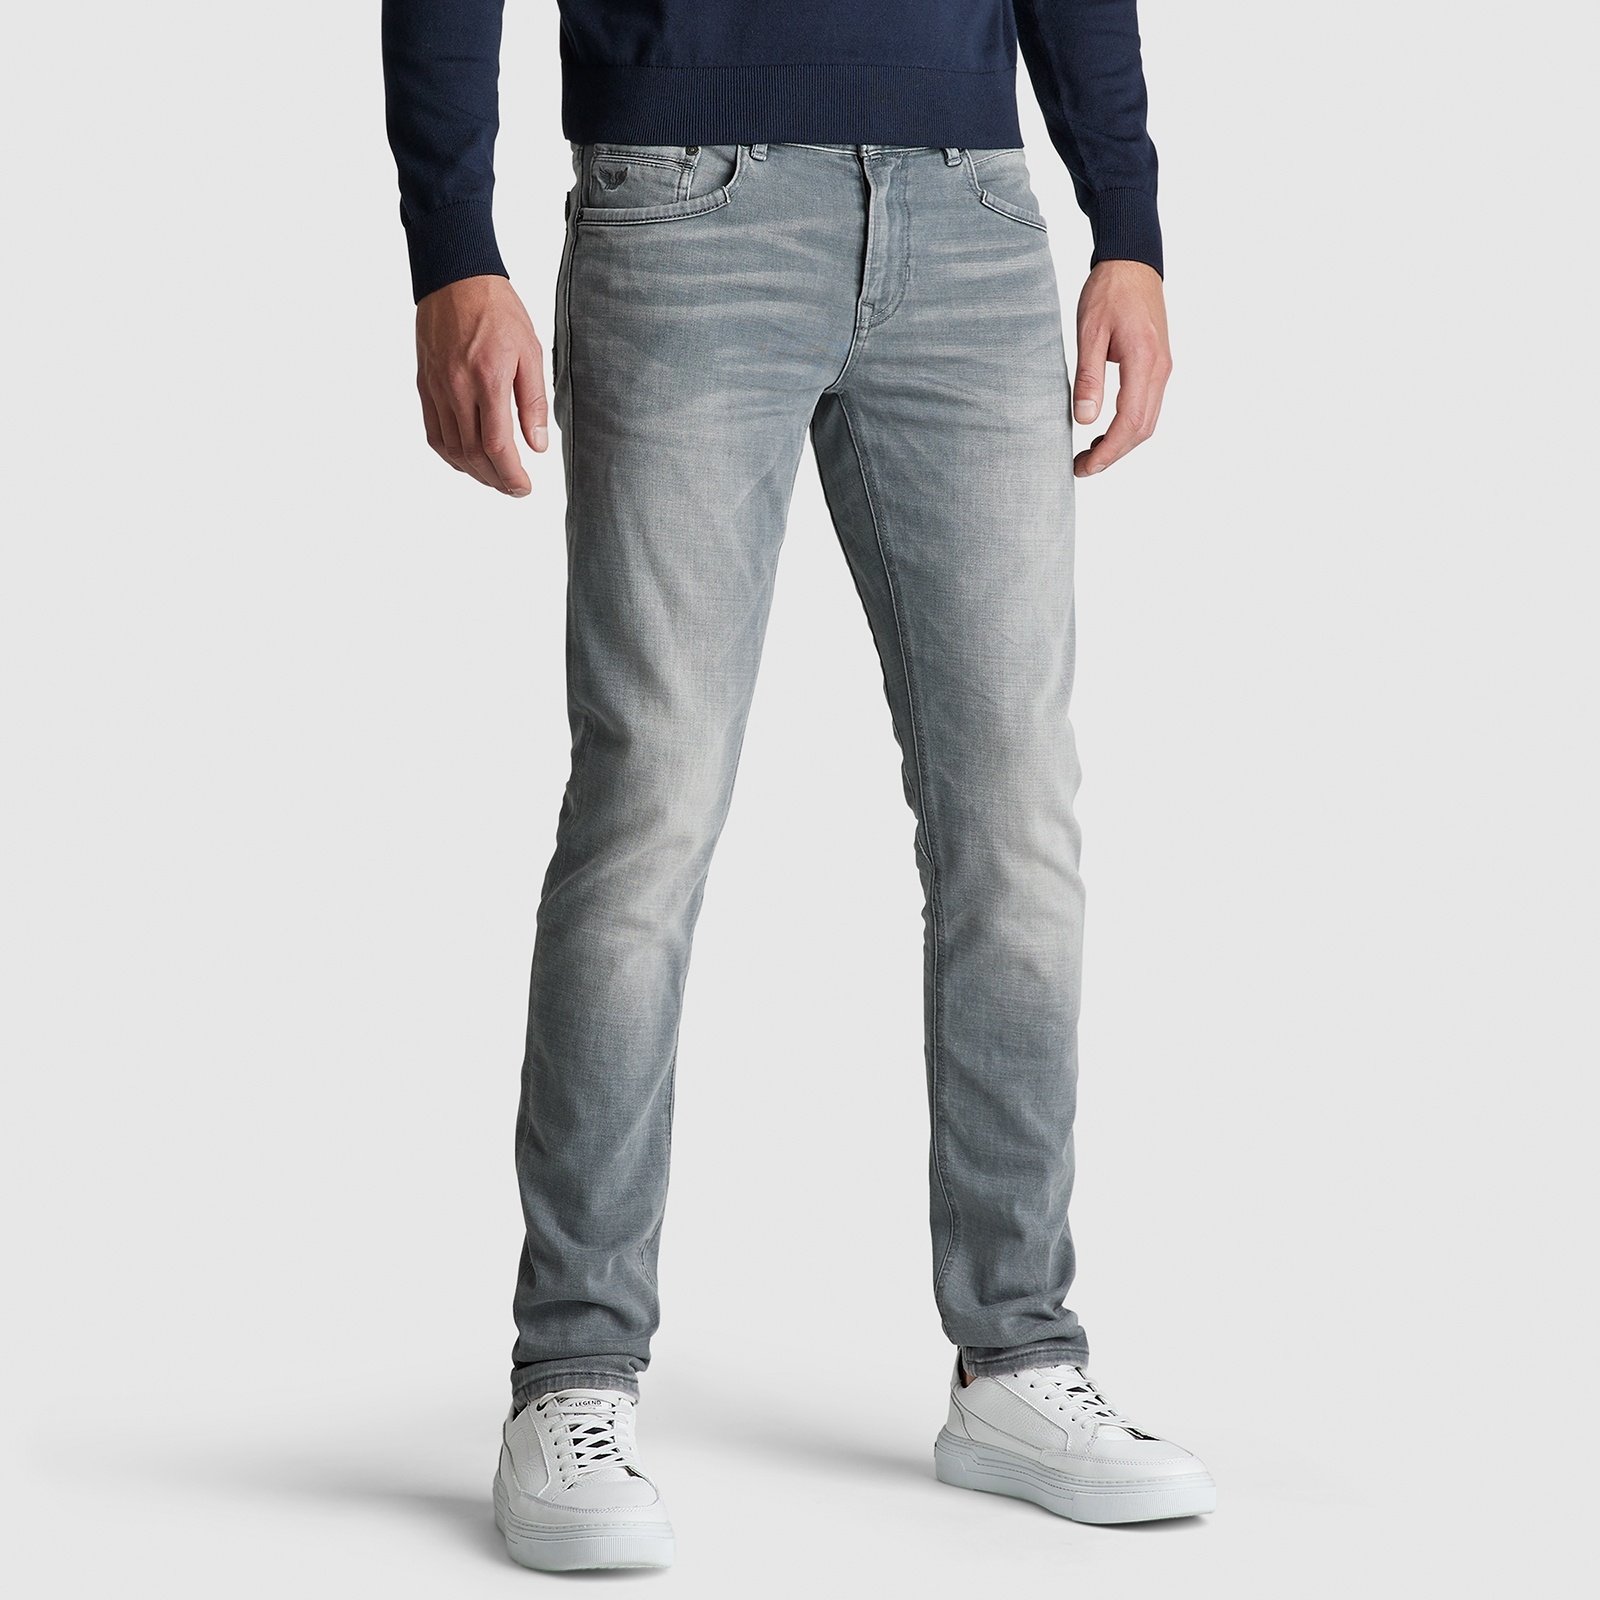 LEGEND TAILWHEEL JEANS - KING Jeans & Casuals